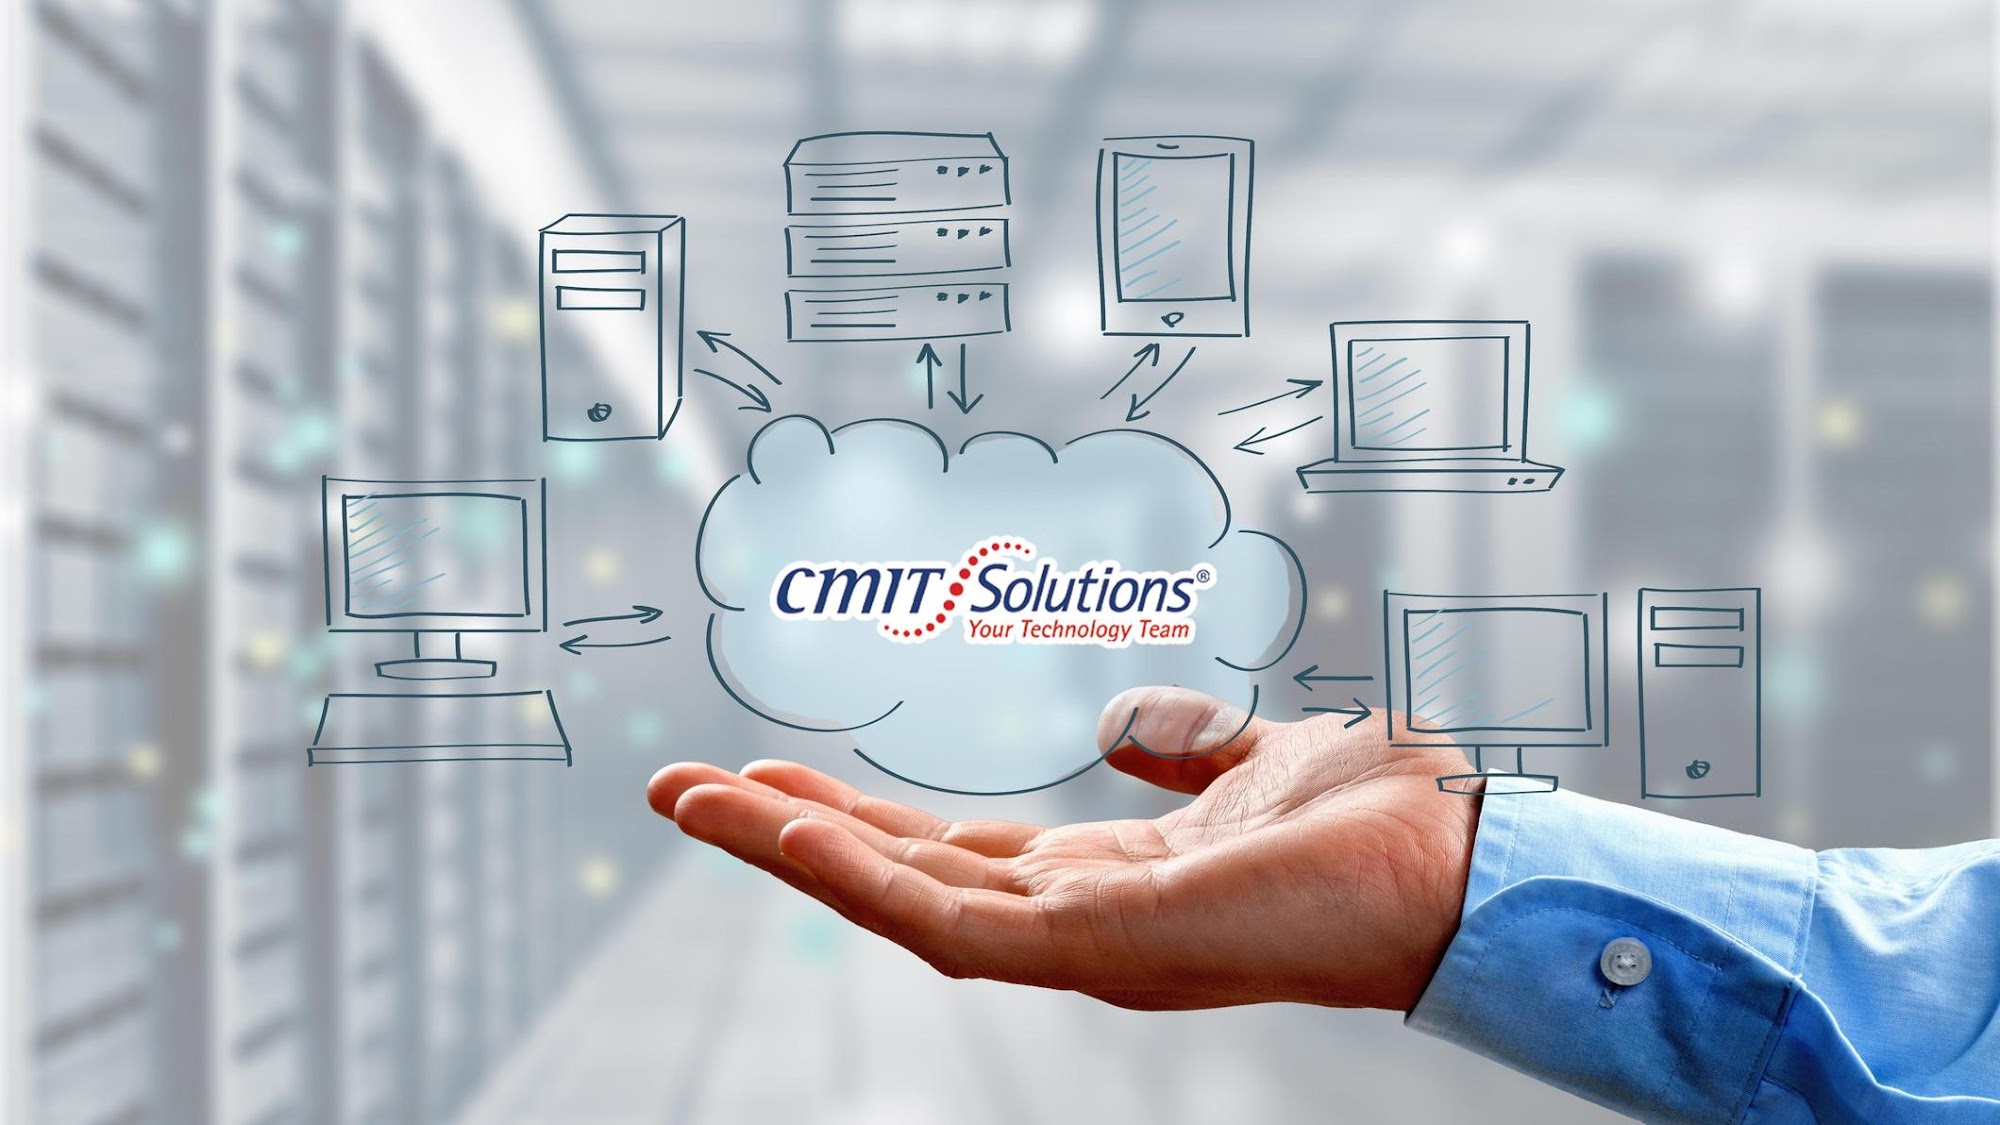 CMIT Solutions of Bothell and Renton